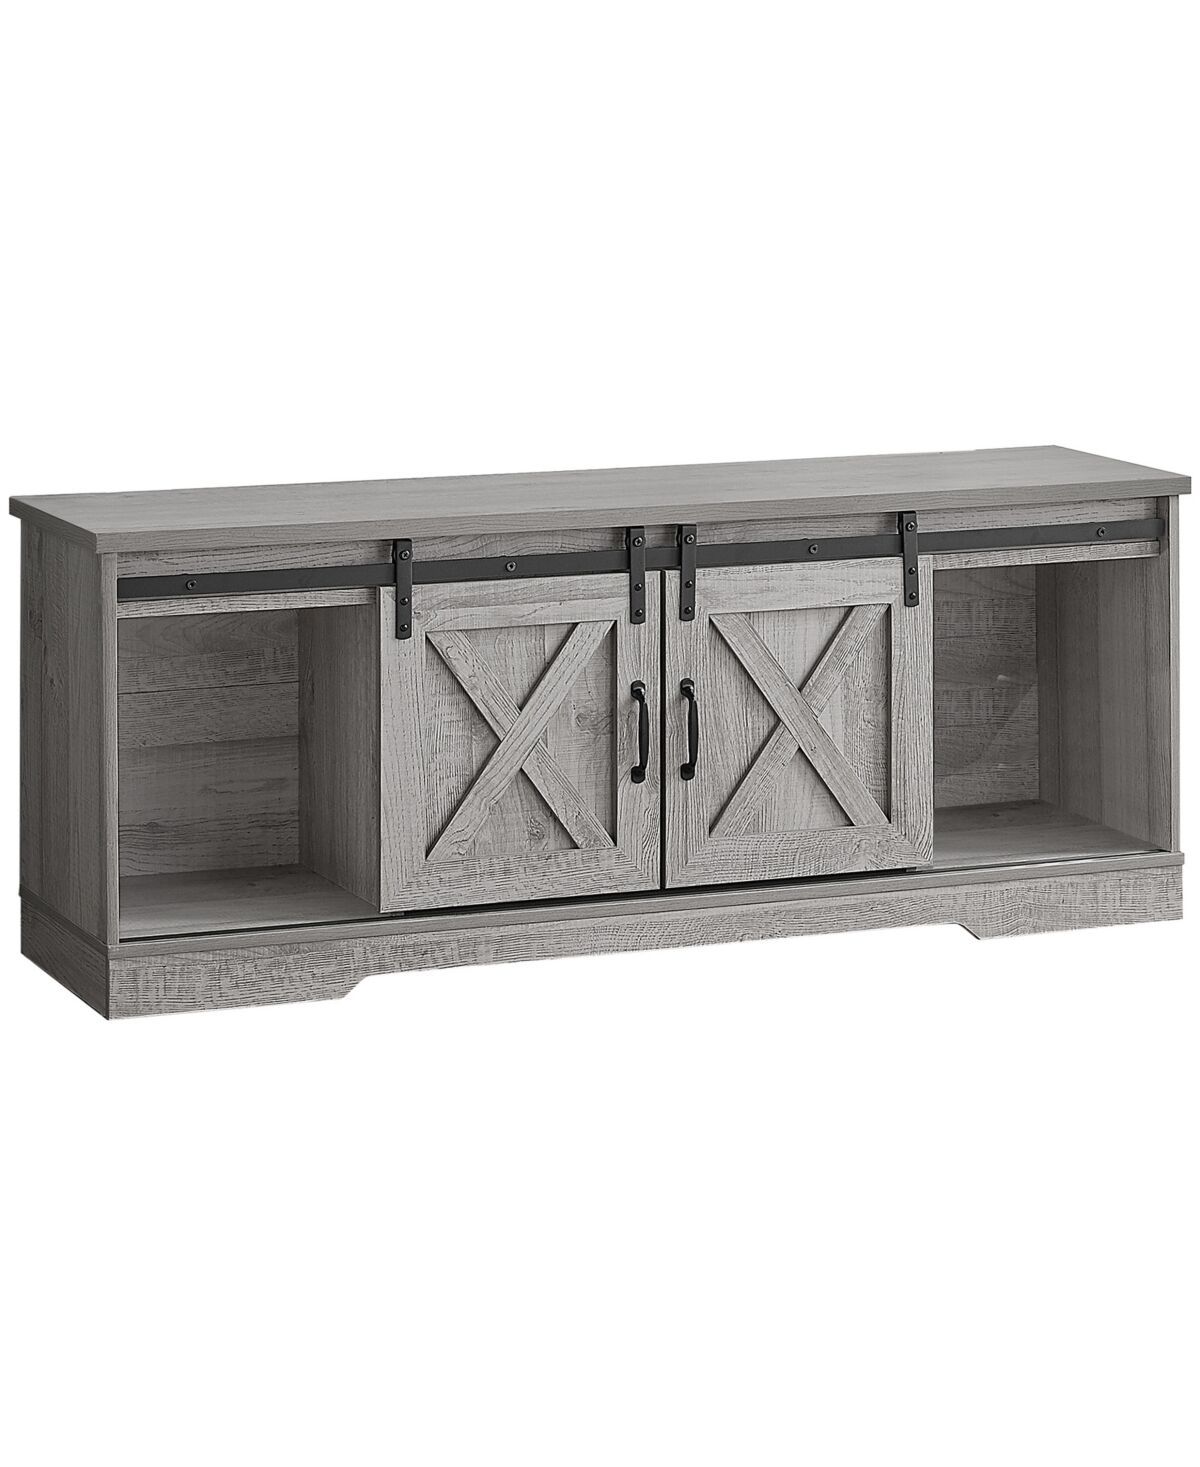 Monarch Specialties Tv Stand with 2 Barn-Style Sliding Doors - Gray